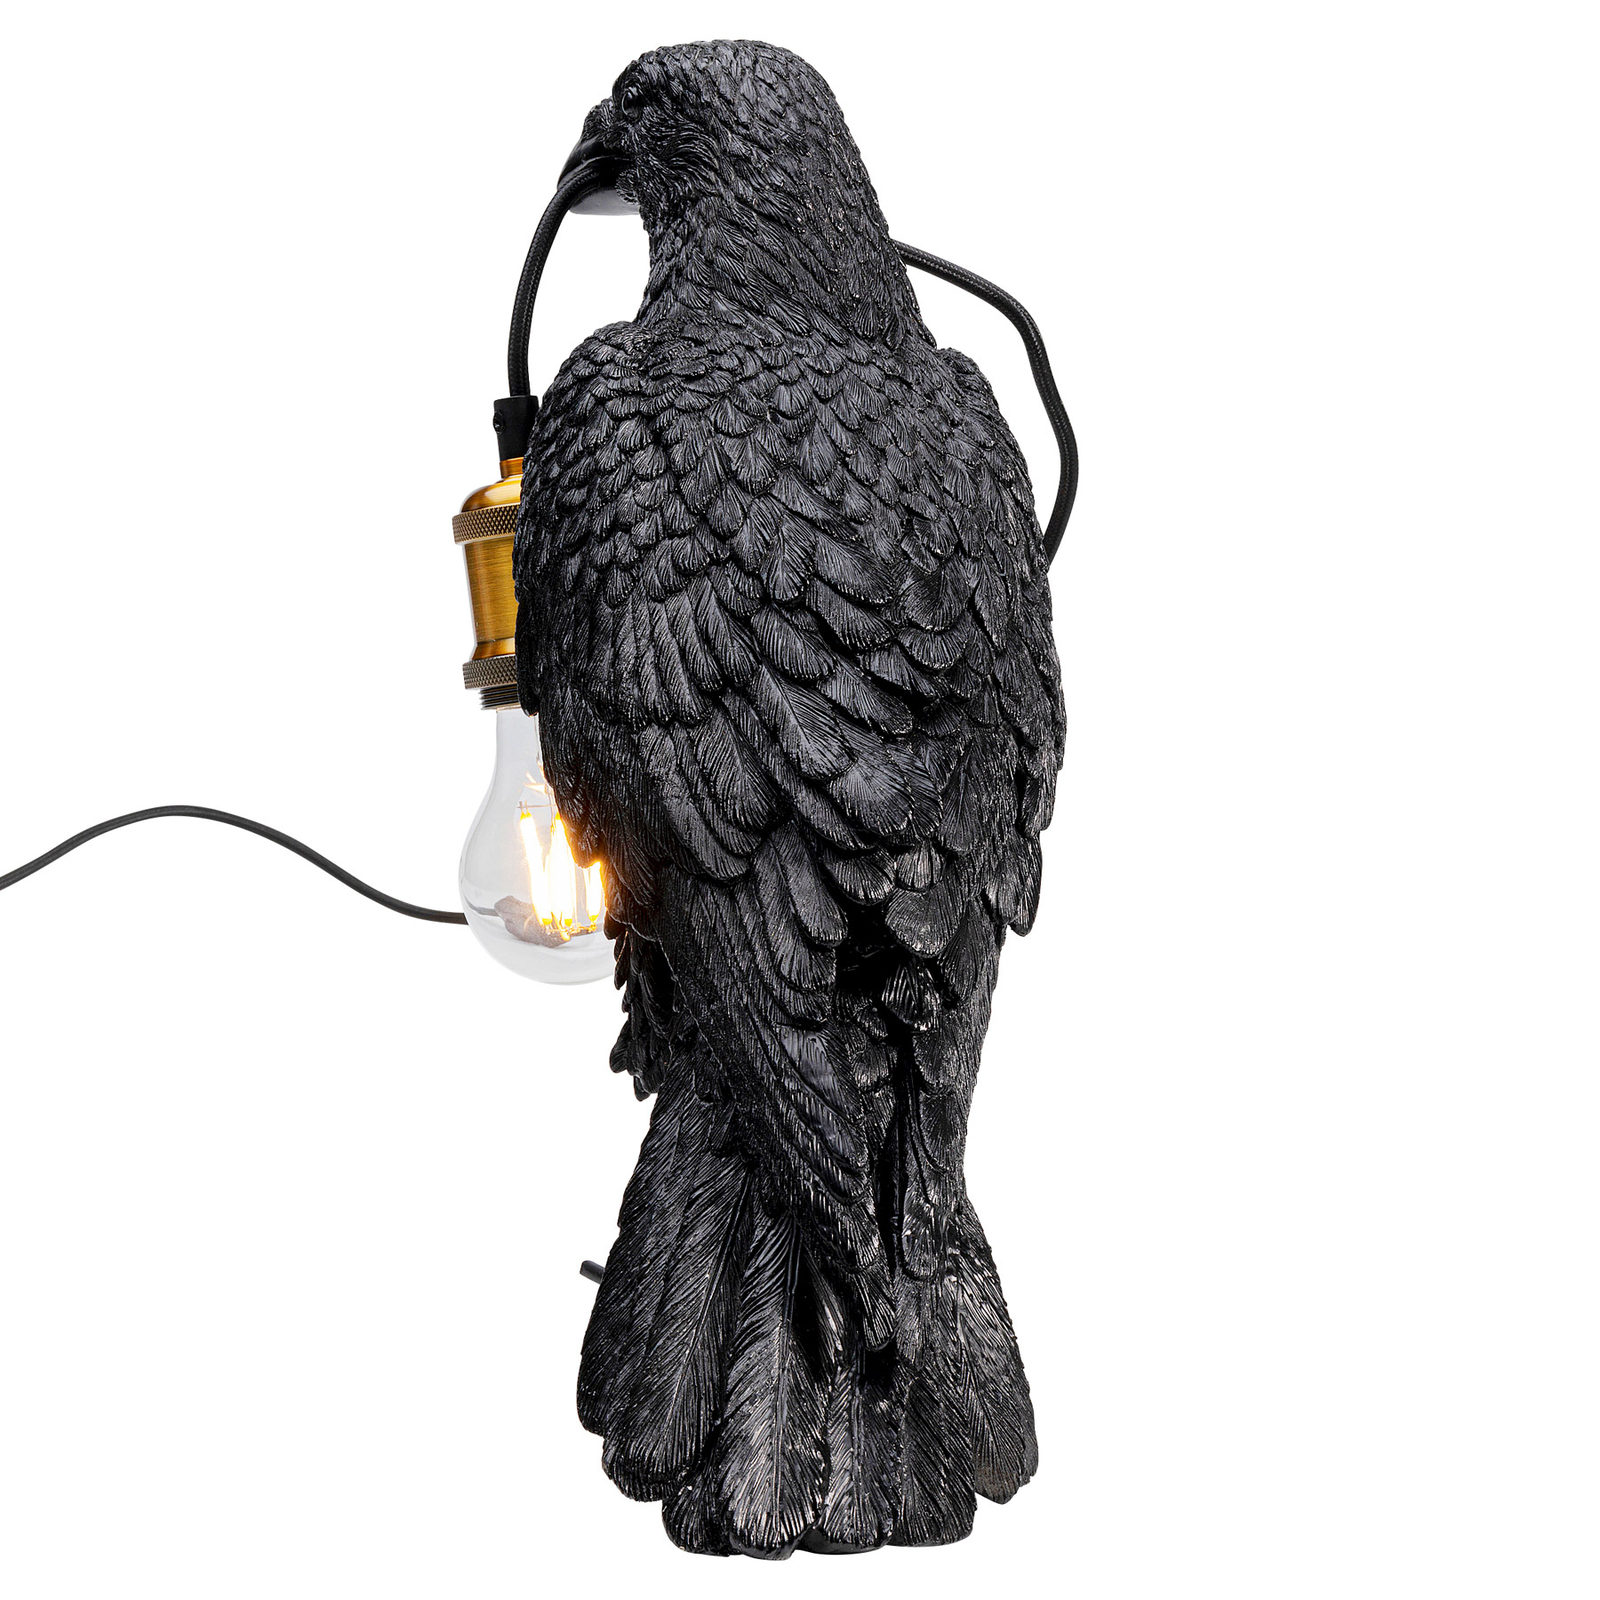 KARE Animal Crow table lamp in the form of a crow